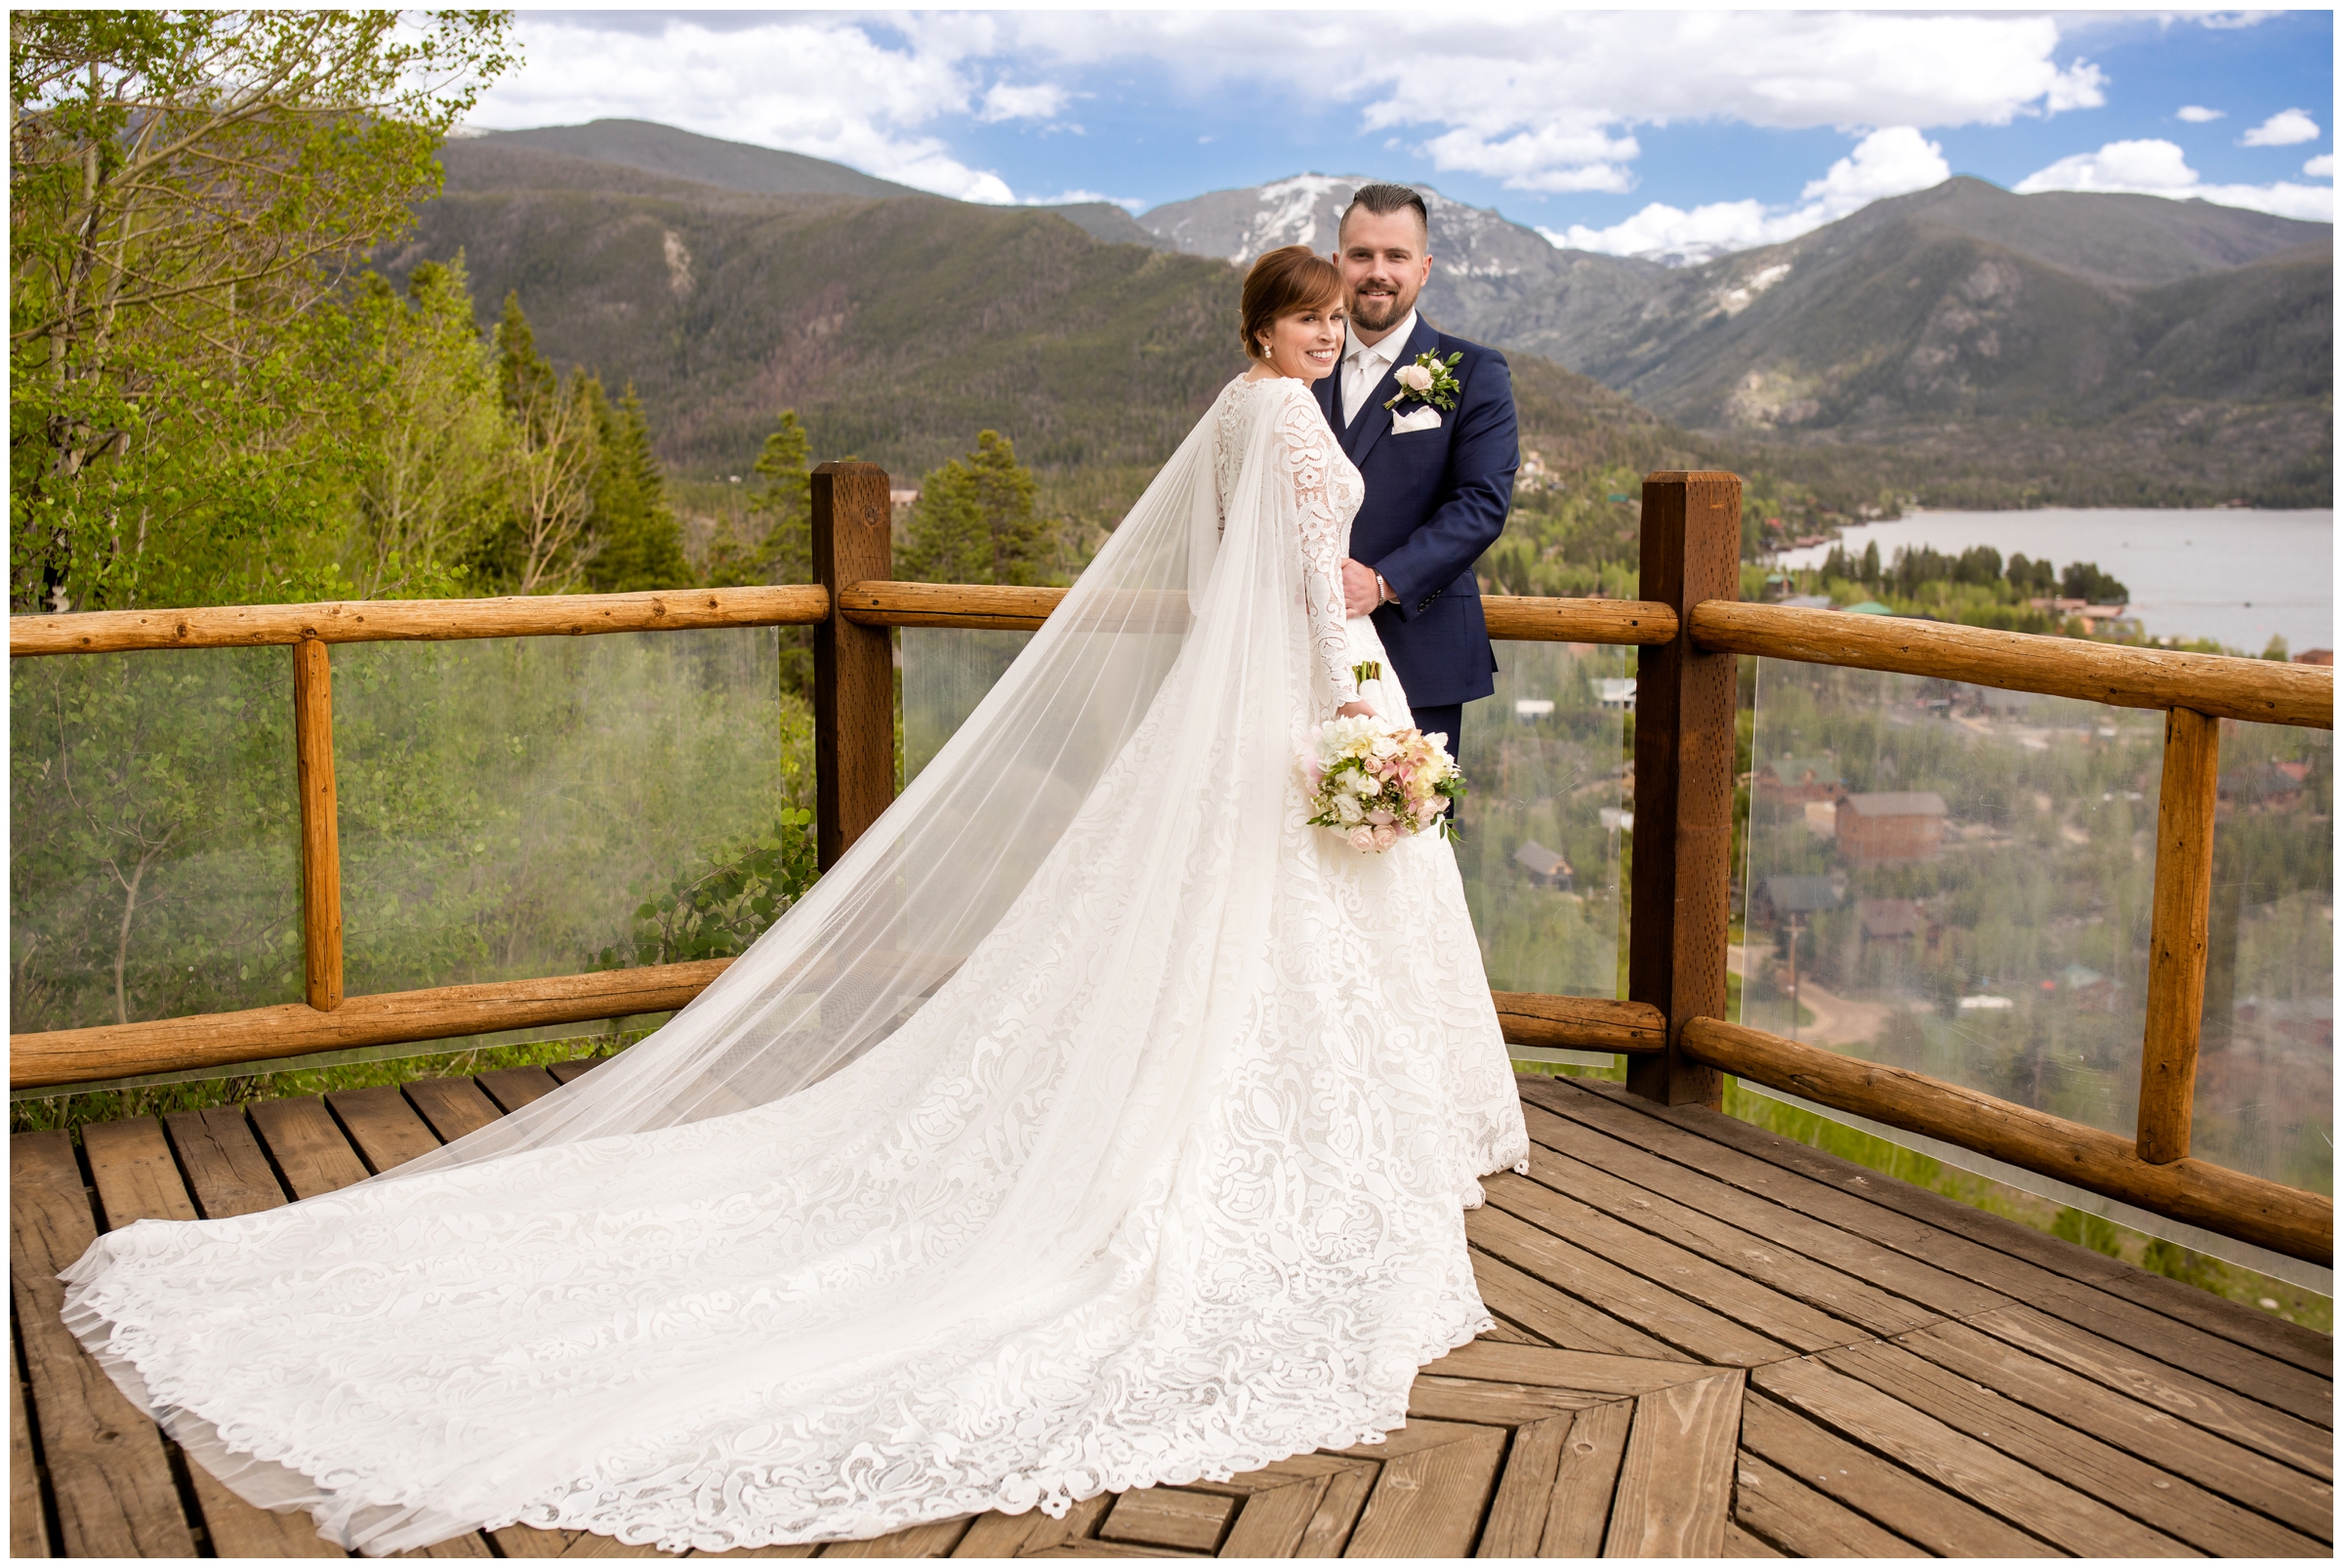 couple posing on wooden deck with mountains in background during Grand Lake Lodge wedding photos in the Colorado mountains 